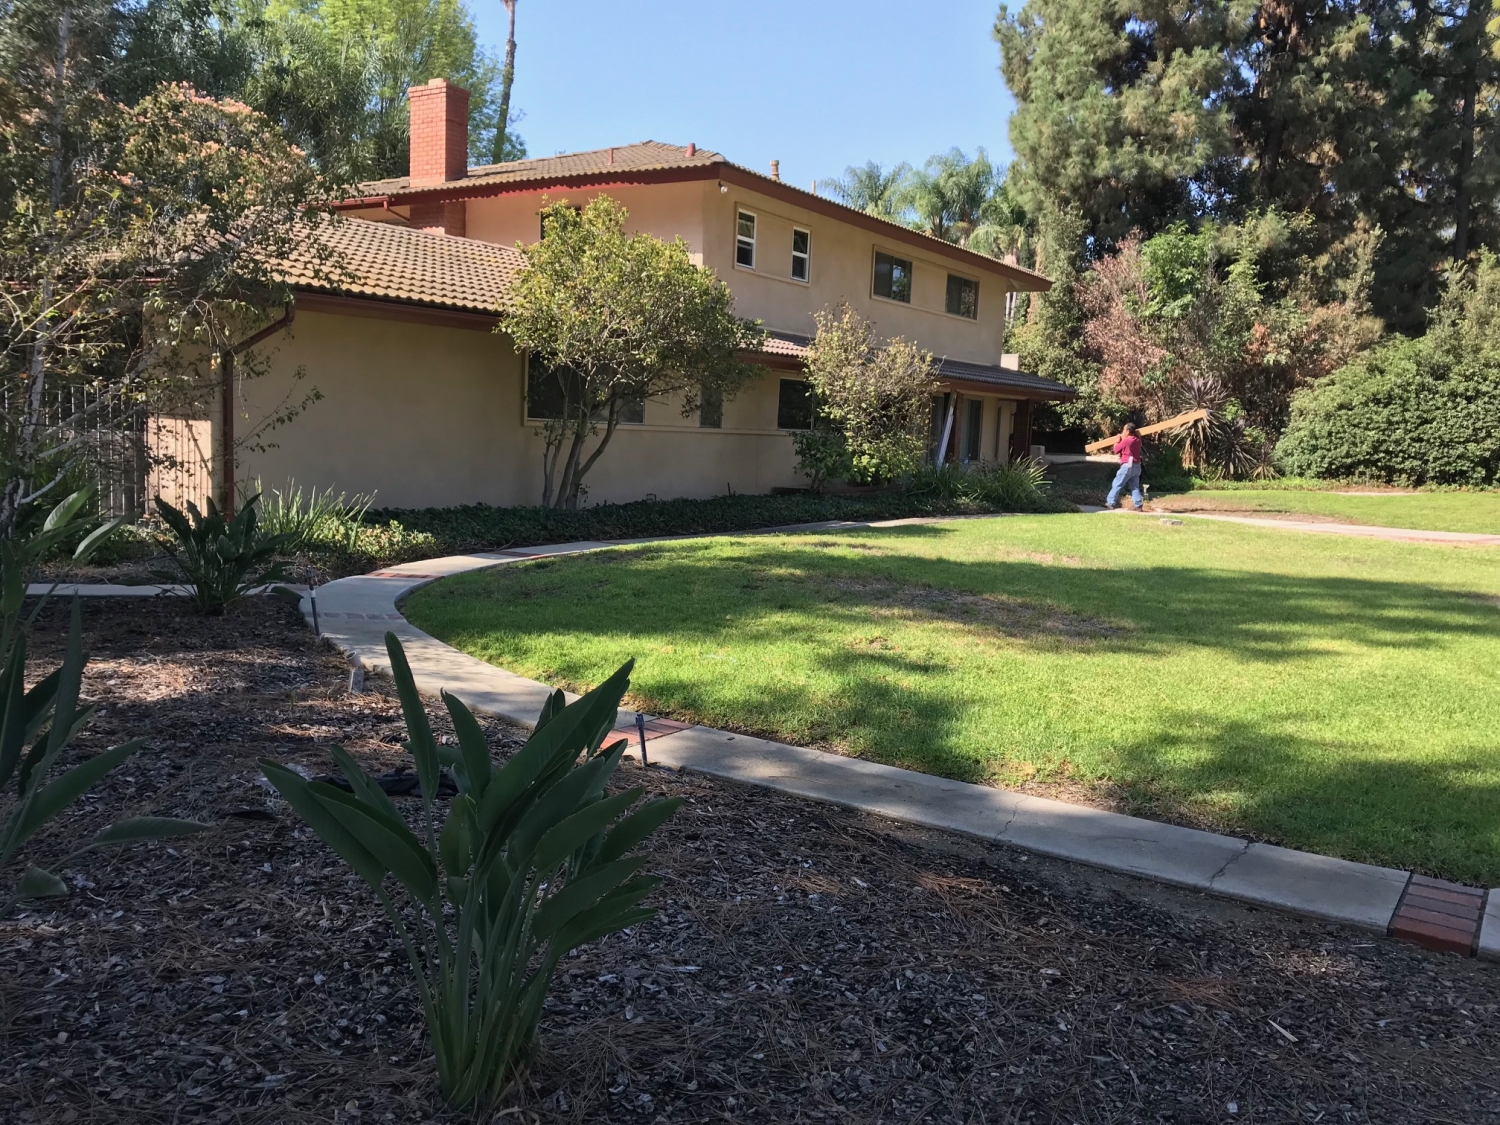 The new John Irwin Memorial House for CSU Fullerton’s Project Rebound, the first college housing initiative for previously incarcerated students in the nation. Grand opening: Aug. 3.